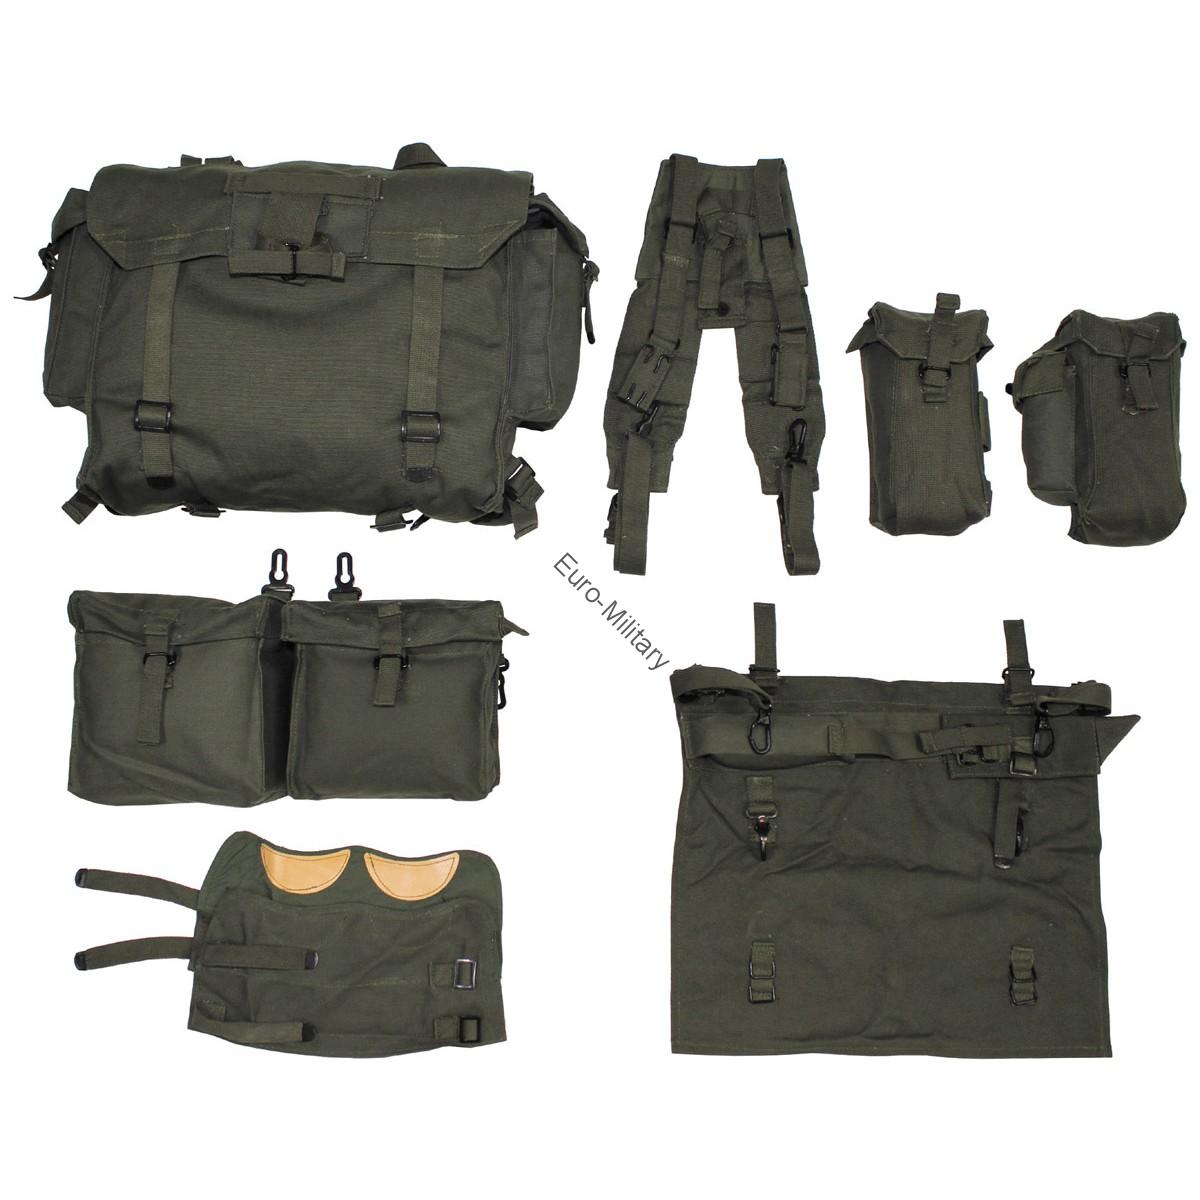 Original Czech Army OSN Tactical Backpack Fully 8 Parts Set - Never Used